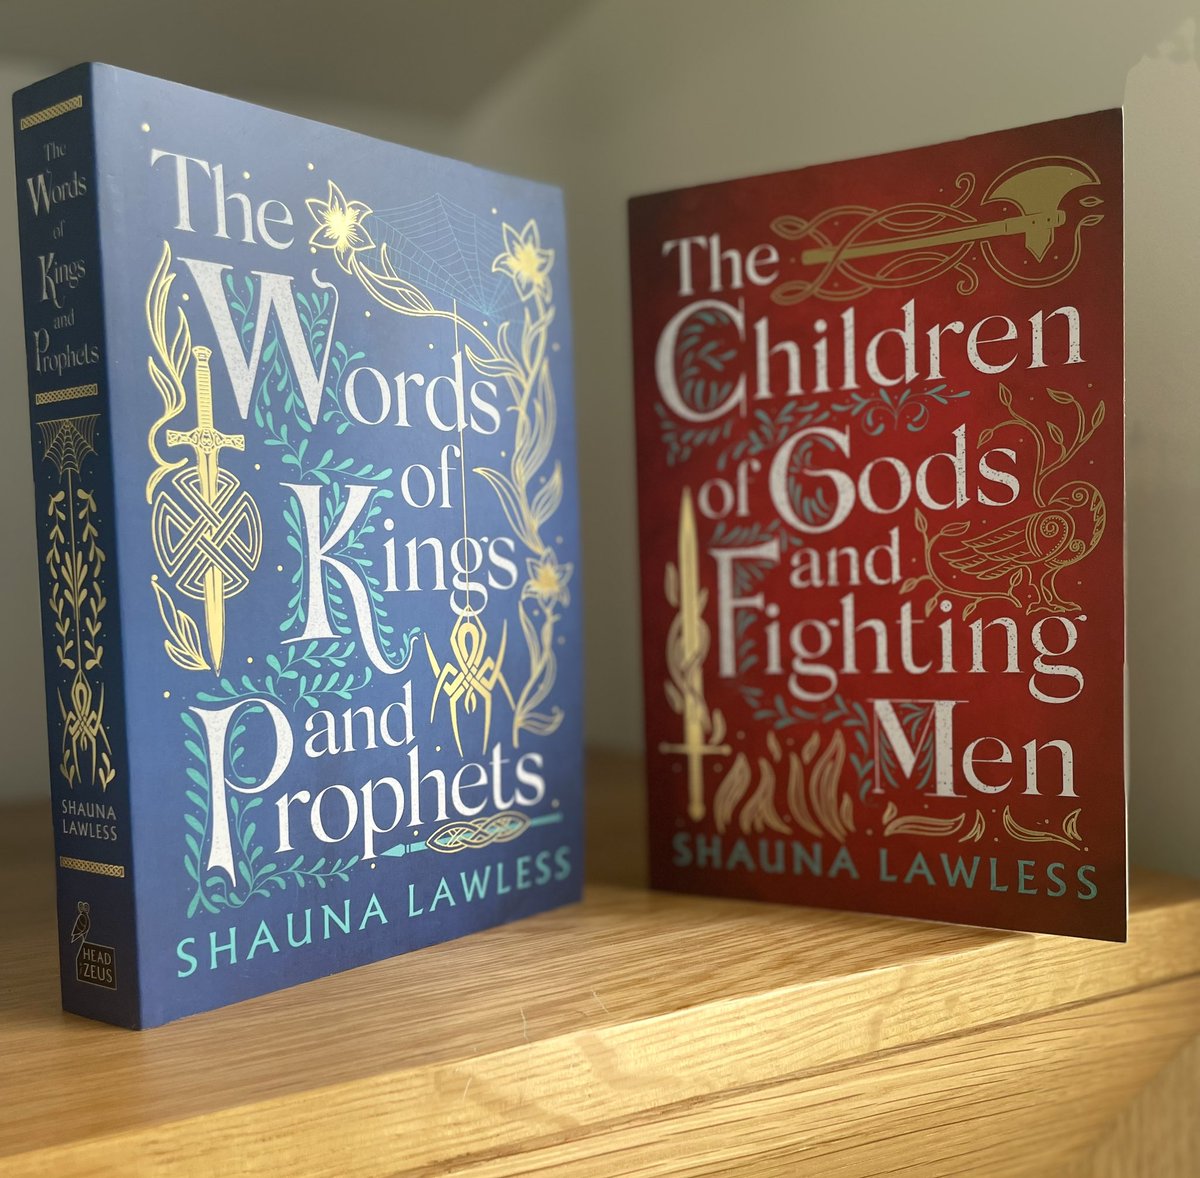 How about a GIVEAWAY!! ❤️📚 To celebrate that the paperback of The Words of Kings and Prophets is being released in TWO WEEKS - I am giving away these TWO paperback editions You must… Follow Like Retweet All boosts appreciated 🔥🔥🔥 (Closes 30th May)